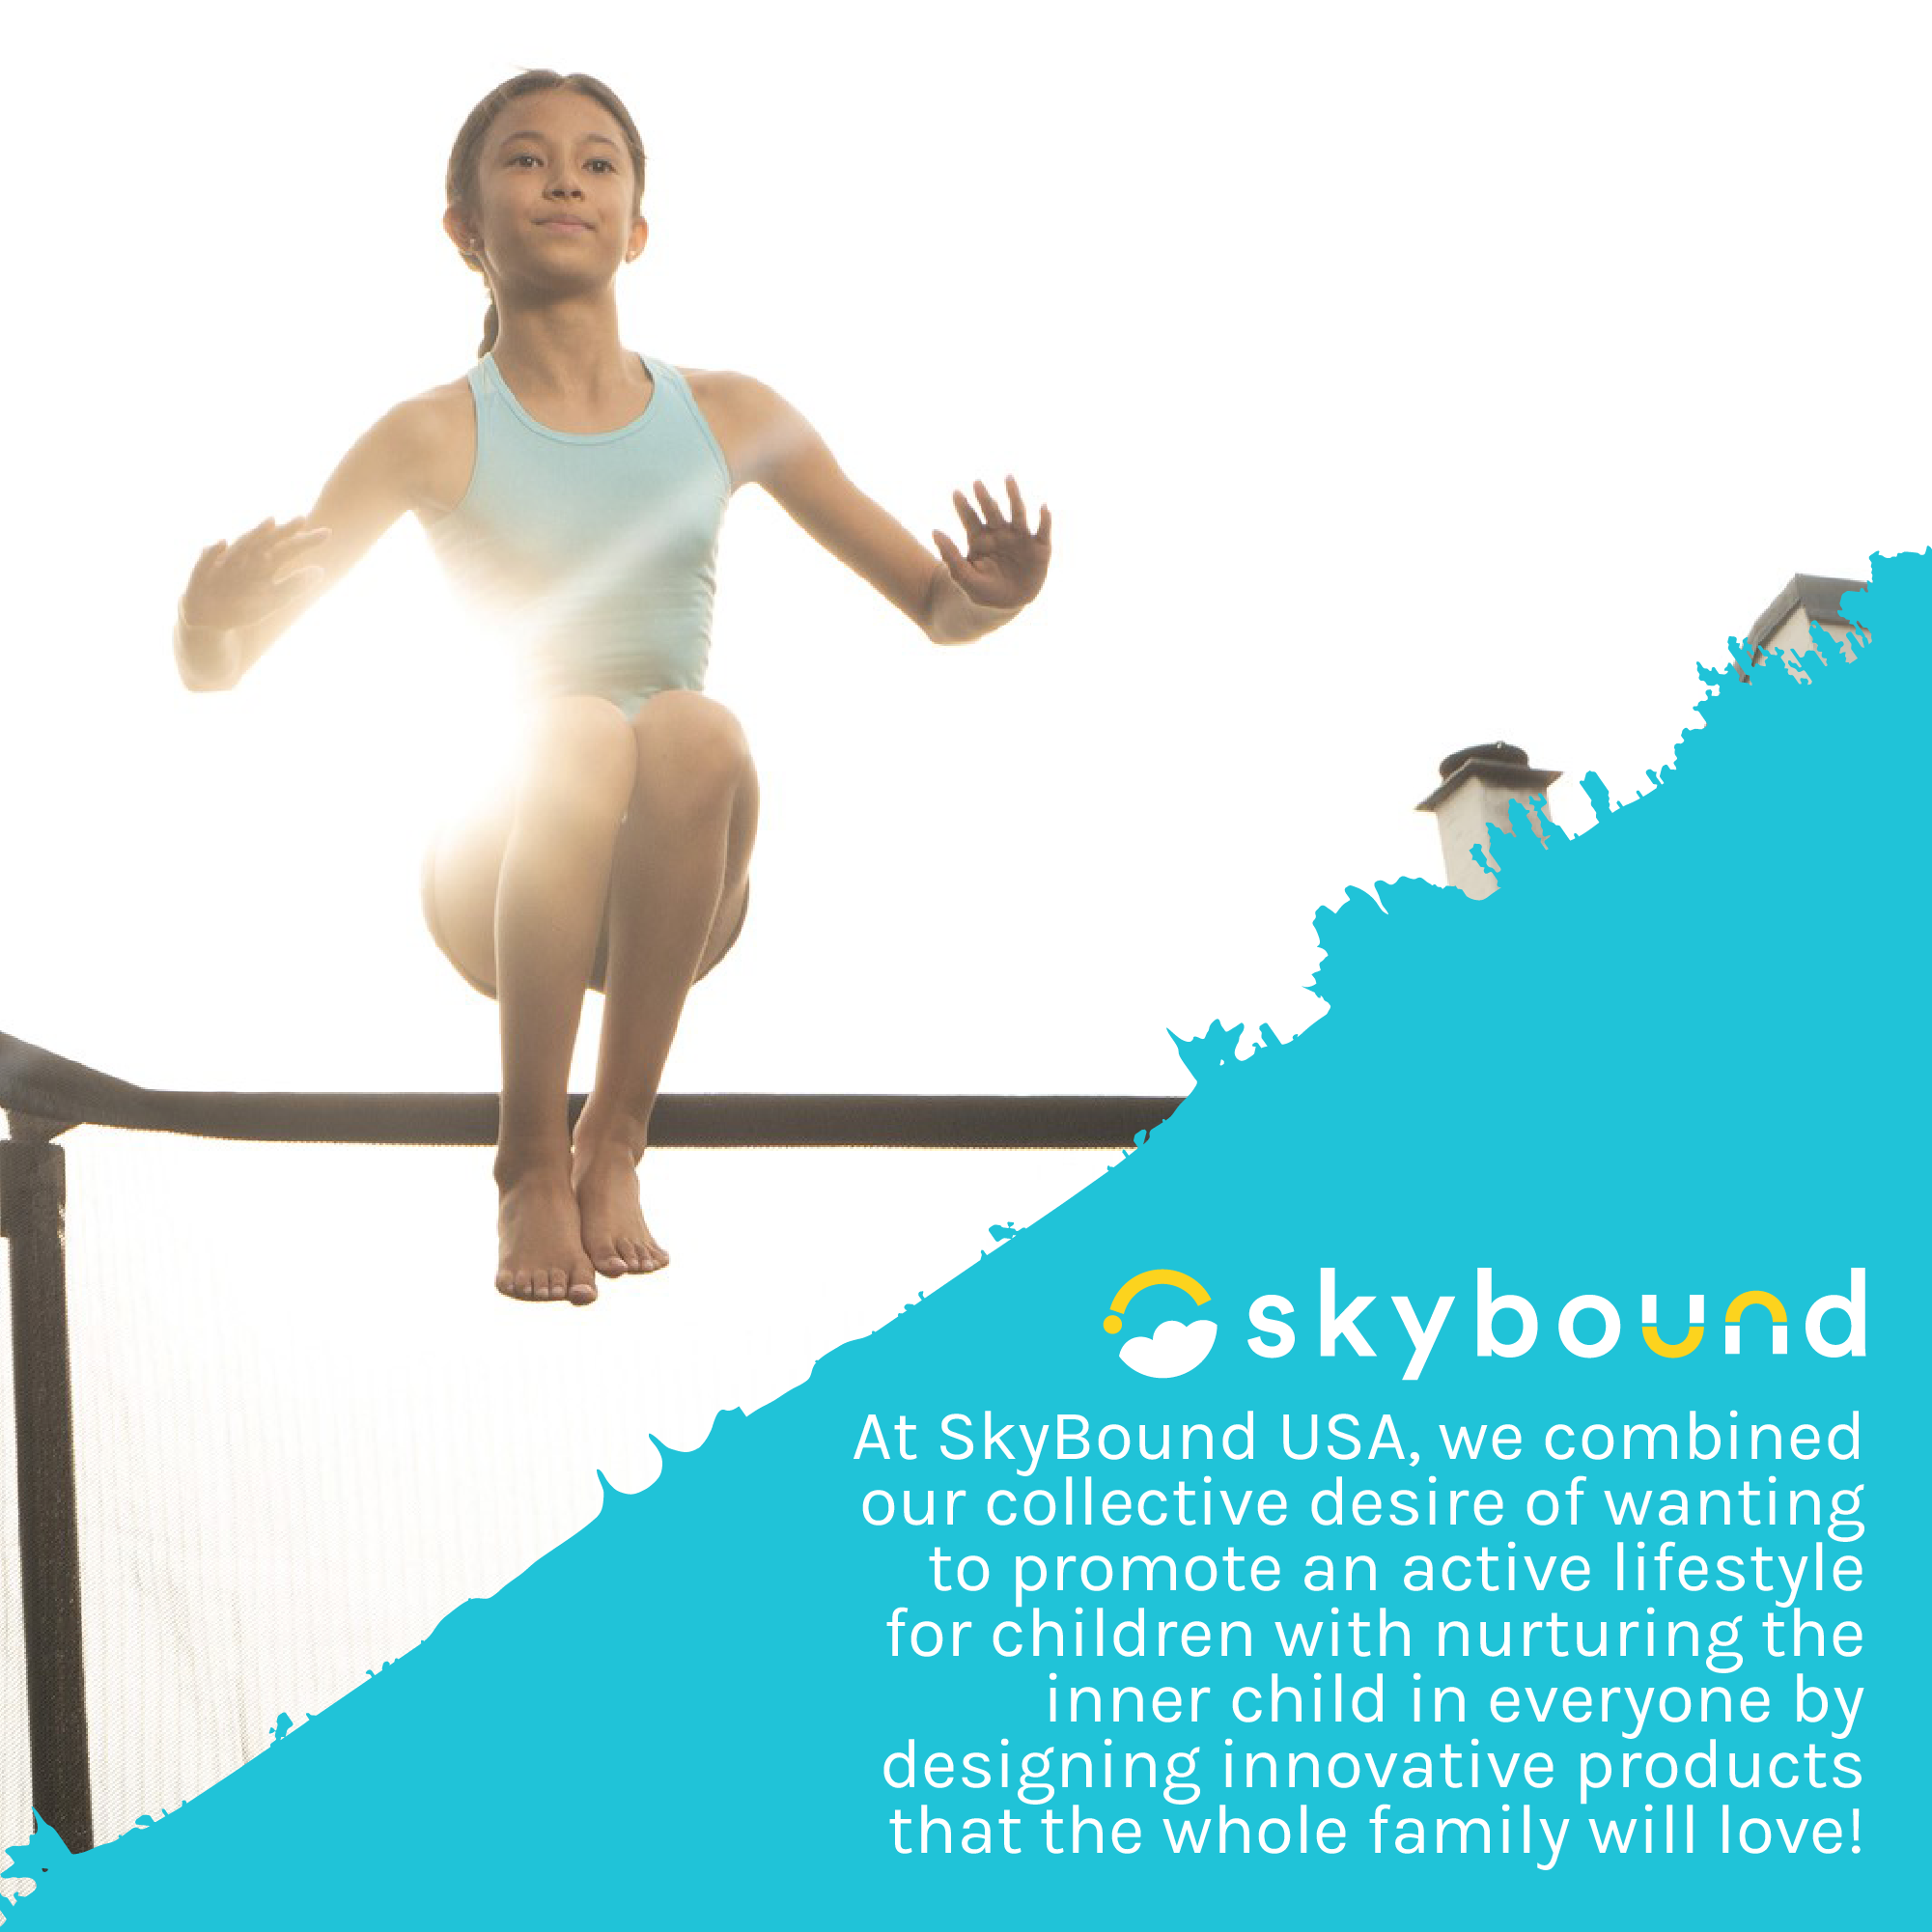 Girl Jumping on a Trampoline.  SkyBound: At SkyBound USA, we combined our collective desire of wanting to promote an active lifestyle for children with nurturing the inner child in everyone by designing innovative products that the whole family will love!